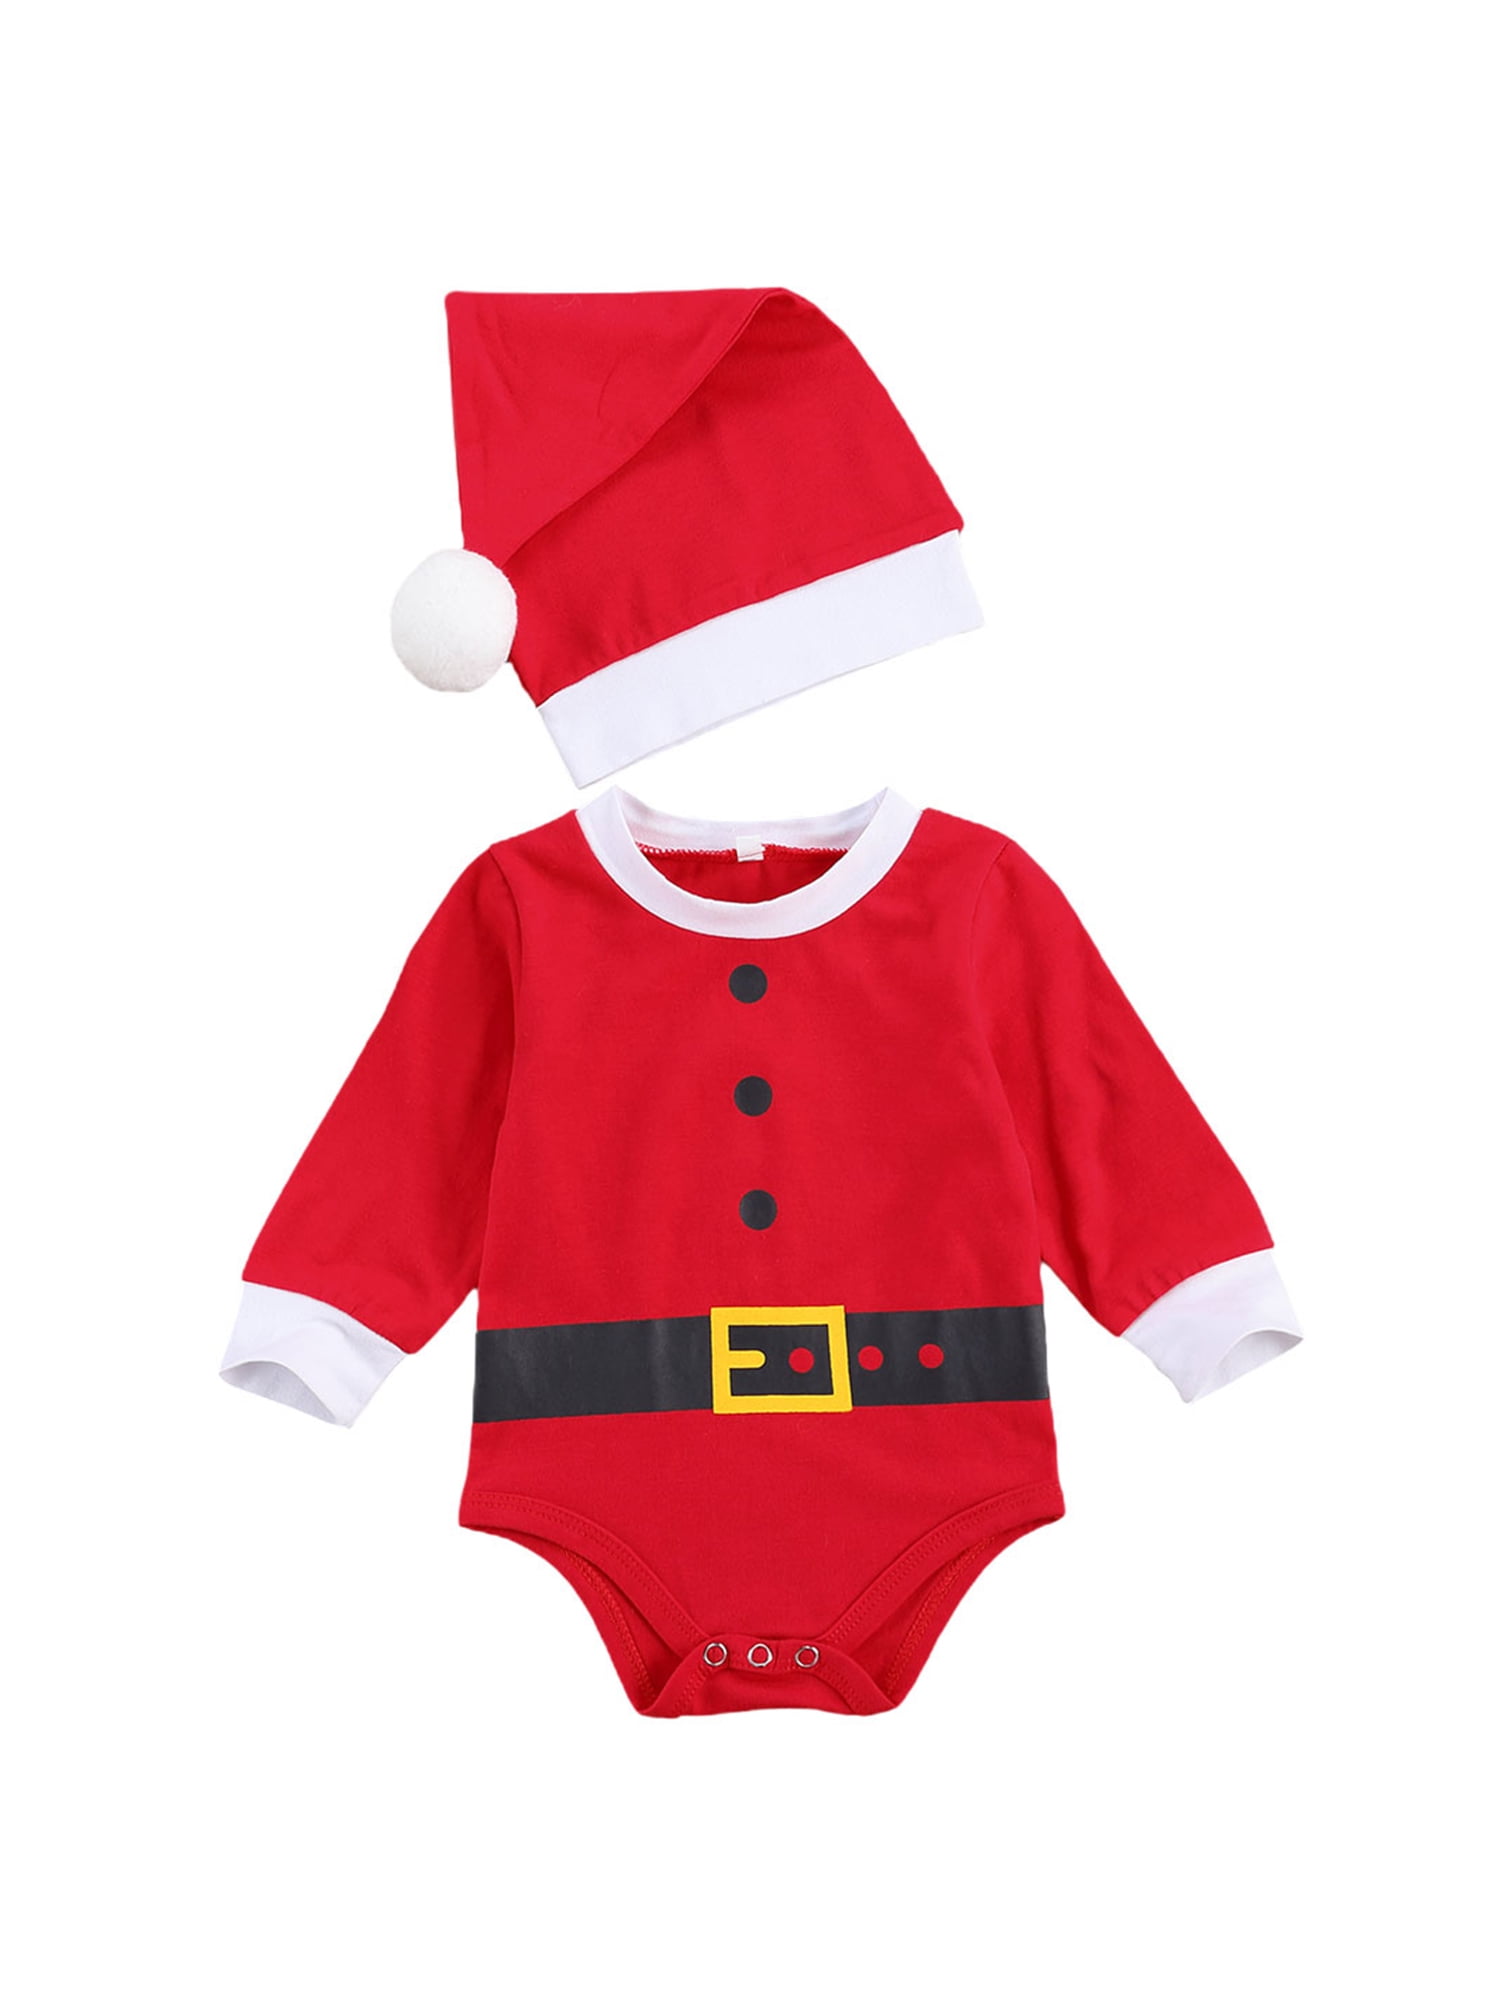 Mickey Mouse Christmas Santa Claus Costume Outfits Romper Clothes Sets Xmas Gift 